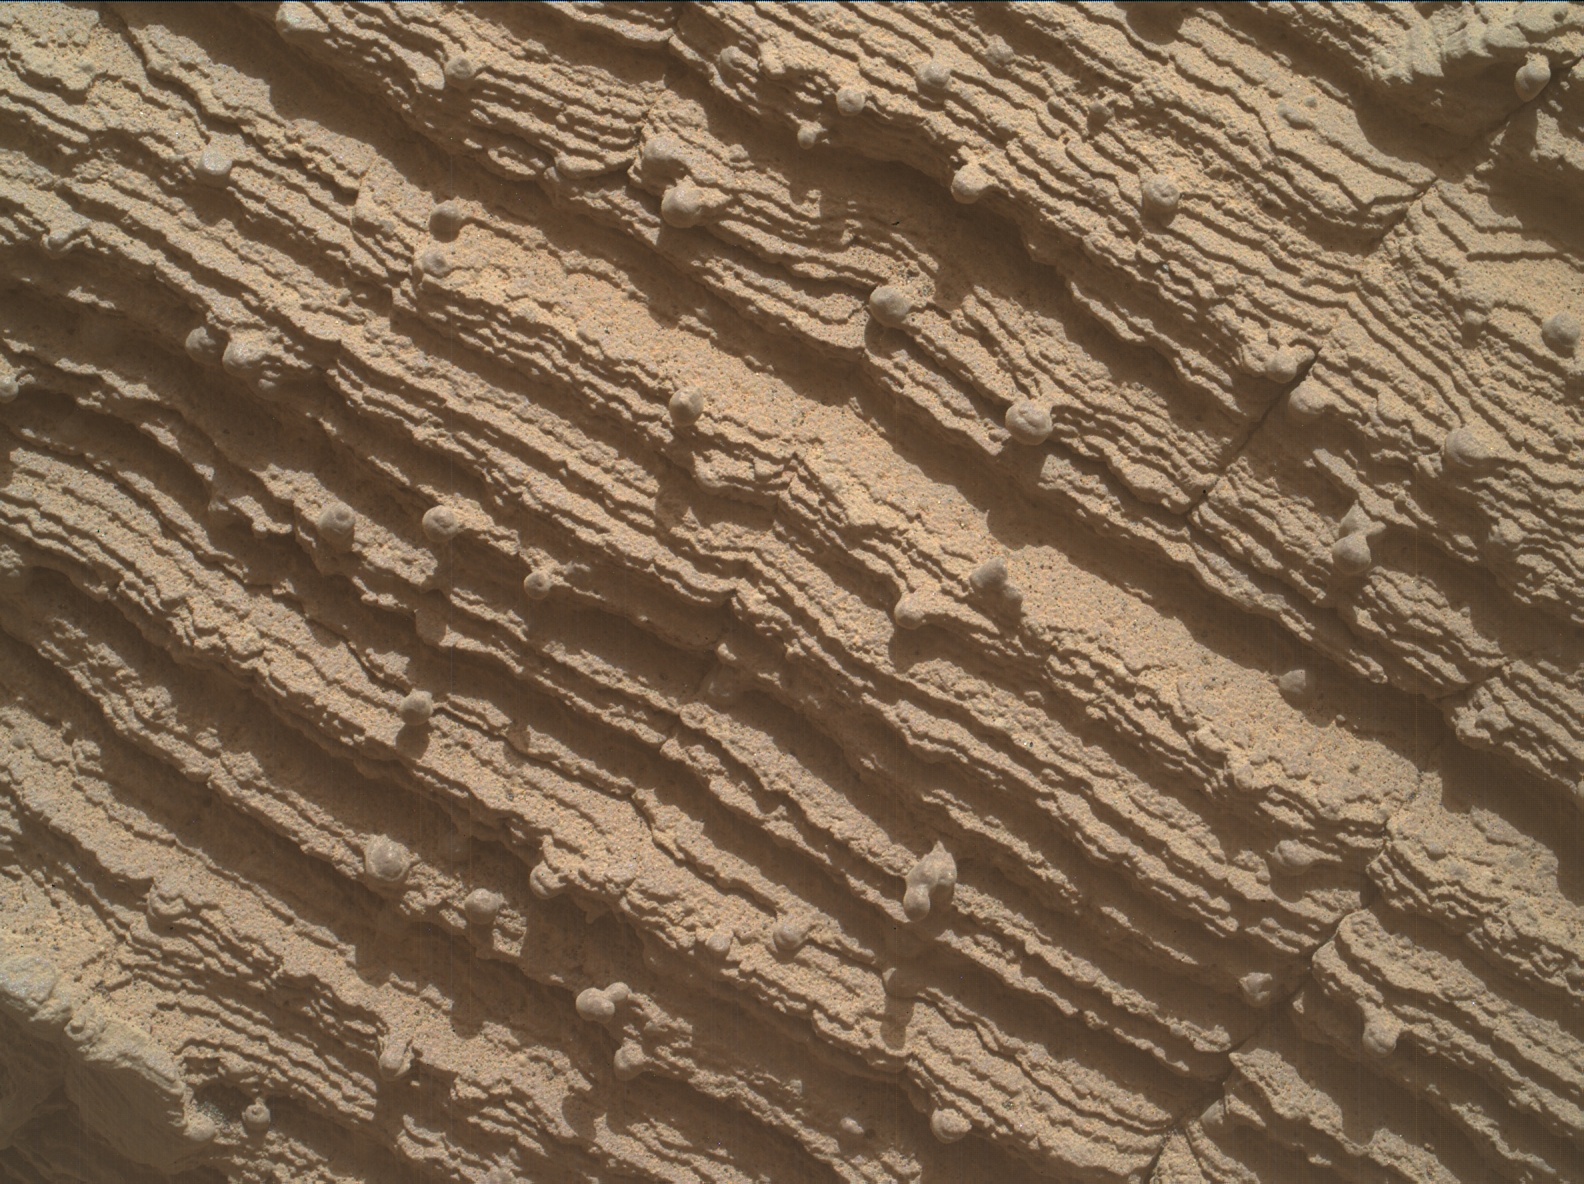 Nasa's Mars rover Curiosity acquired this image using its Mars Hand Lens Imager (MAHLI) on Sol 3605